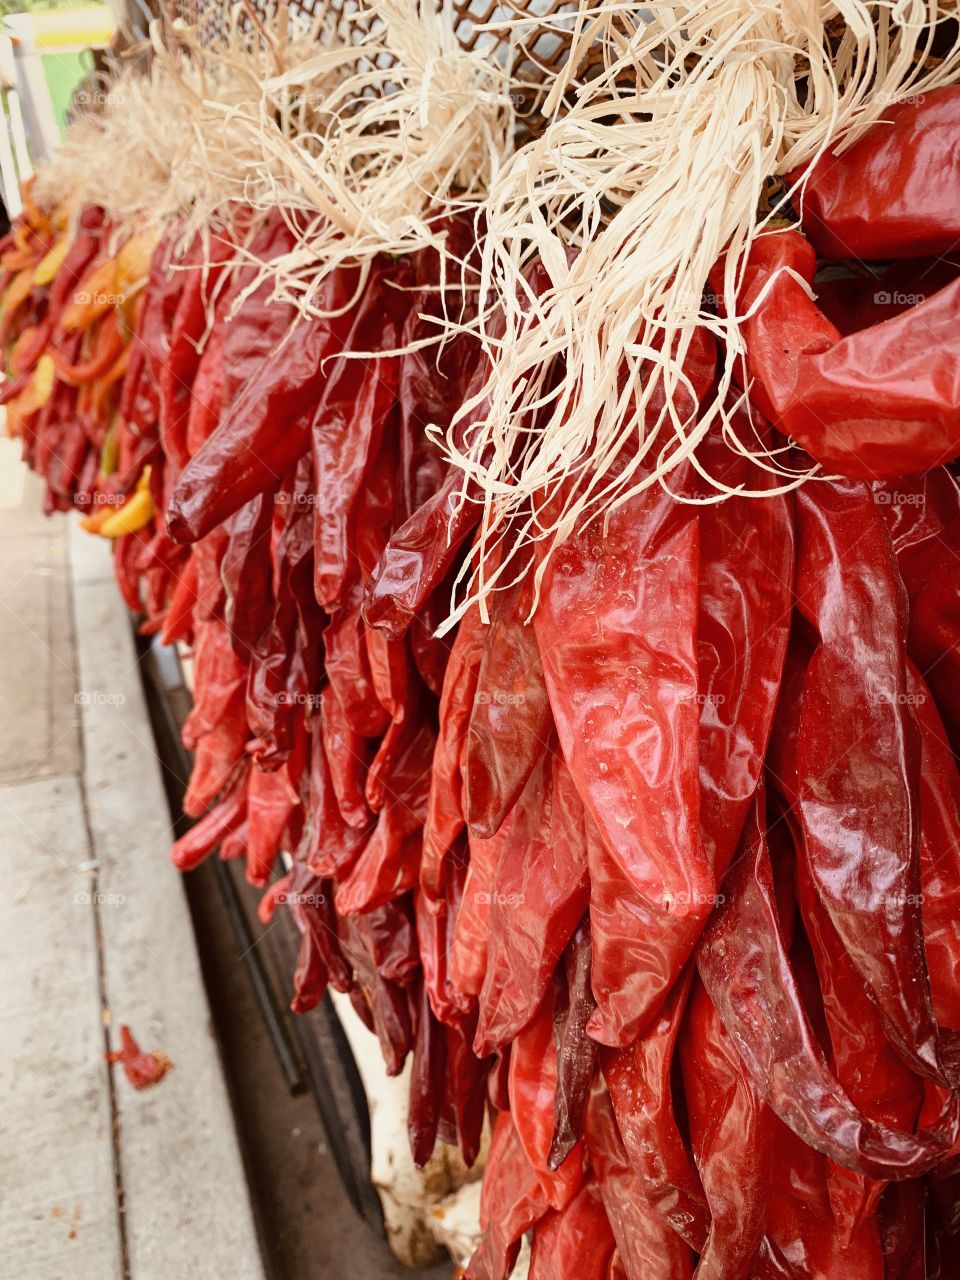 Vivid red, orange, and yellow chilis hang in bunches from a truck at an outdoor farmers market.